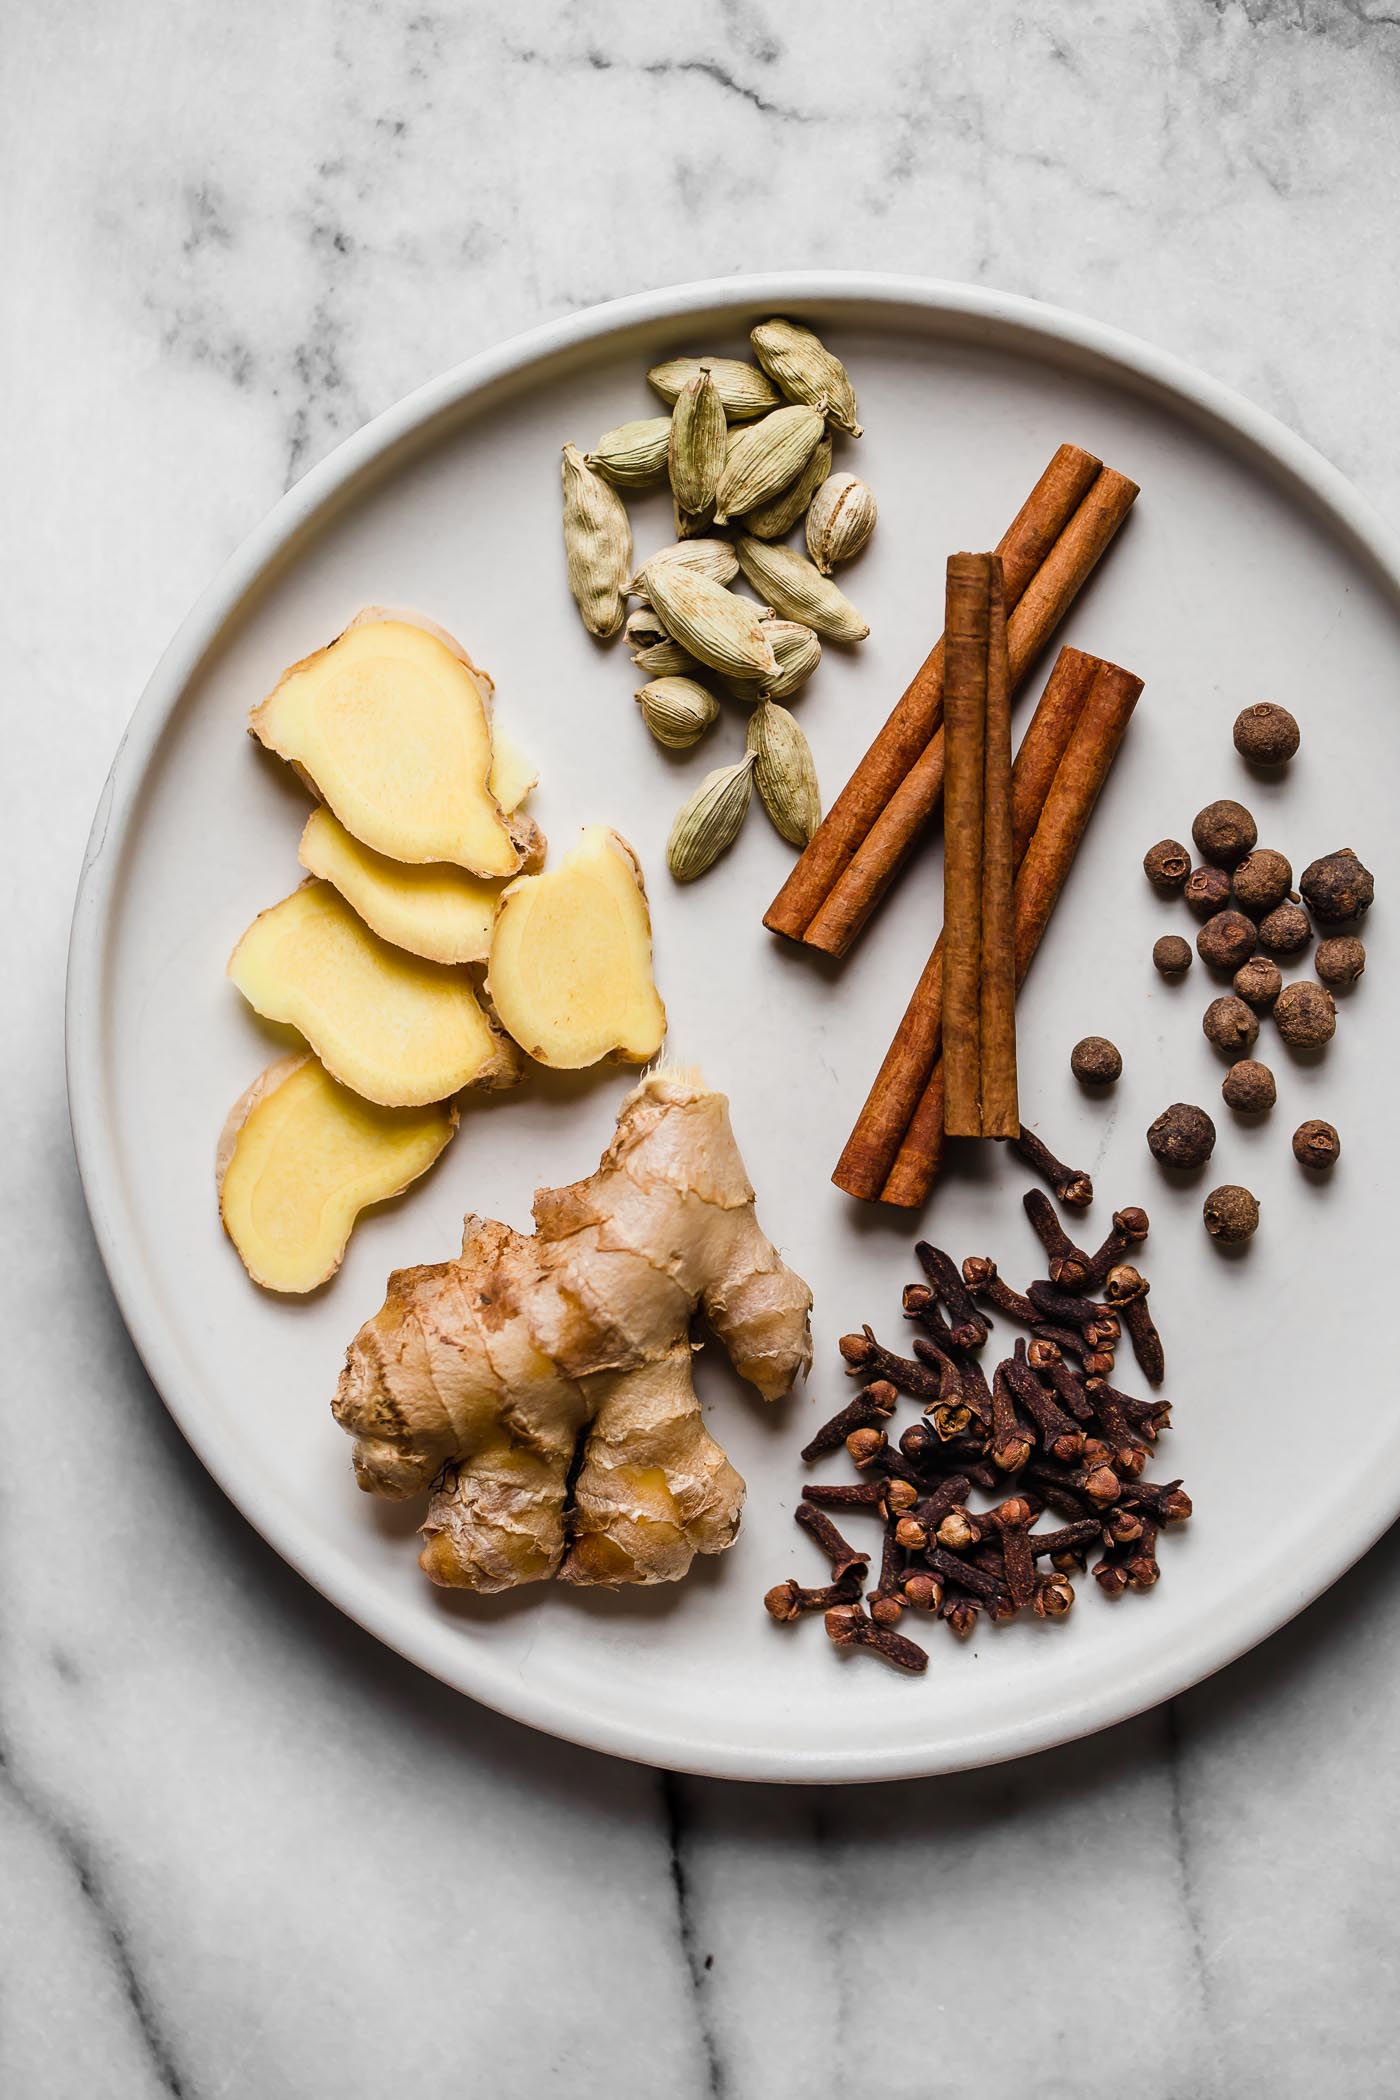 homemade chai spice mix recipe (only 6